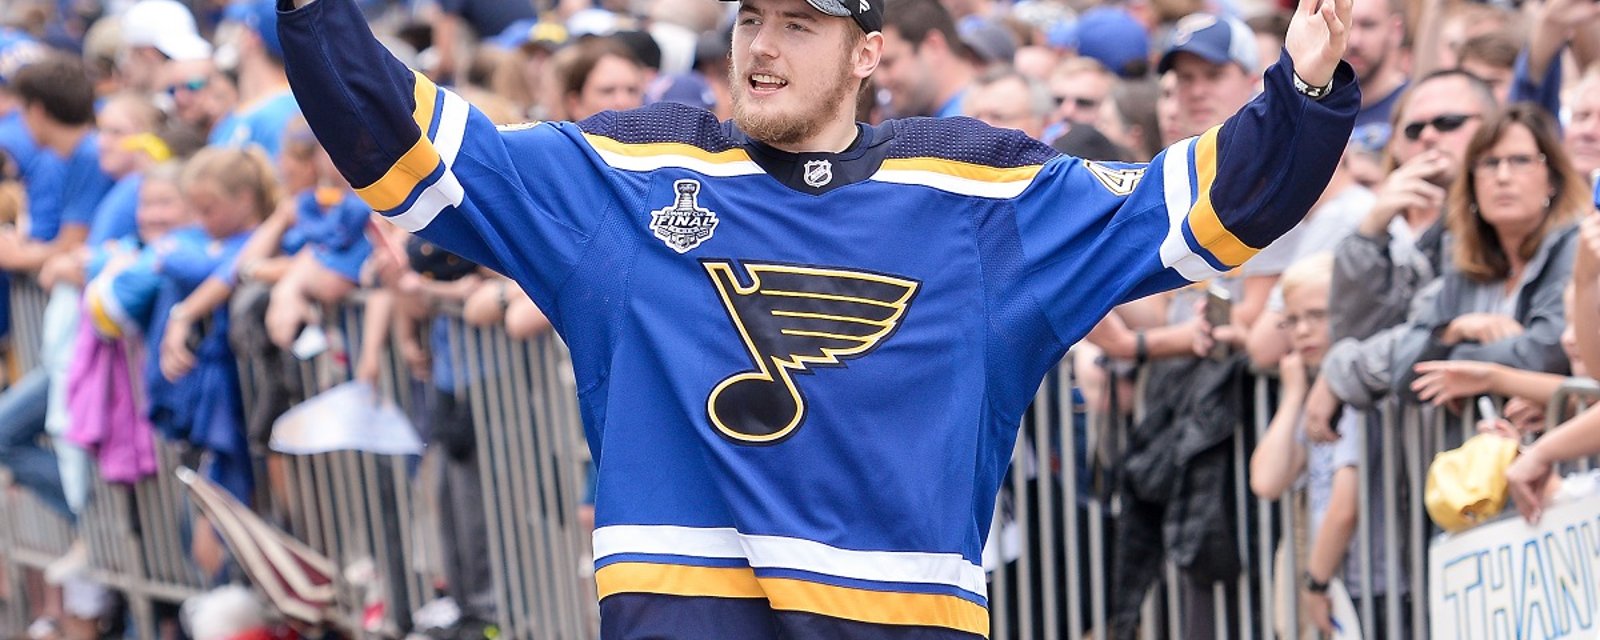 Stanley Cup Champion threatens to leave the St. Louis Blues.